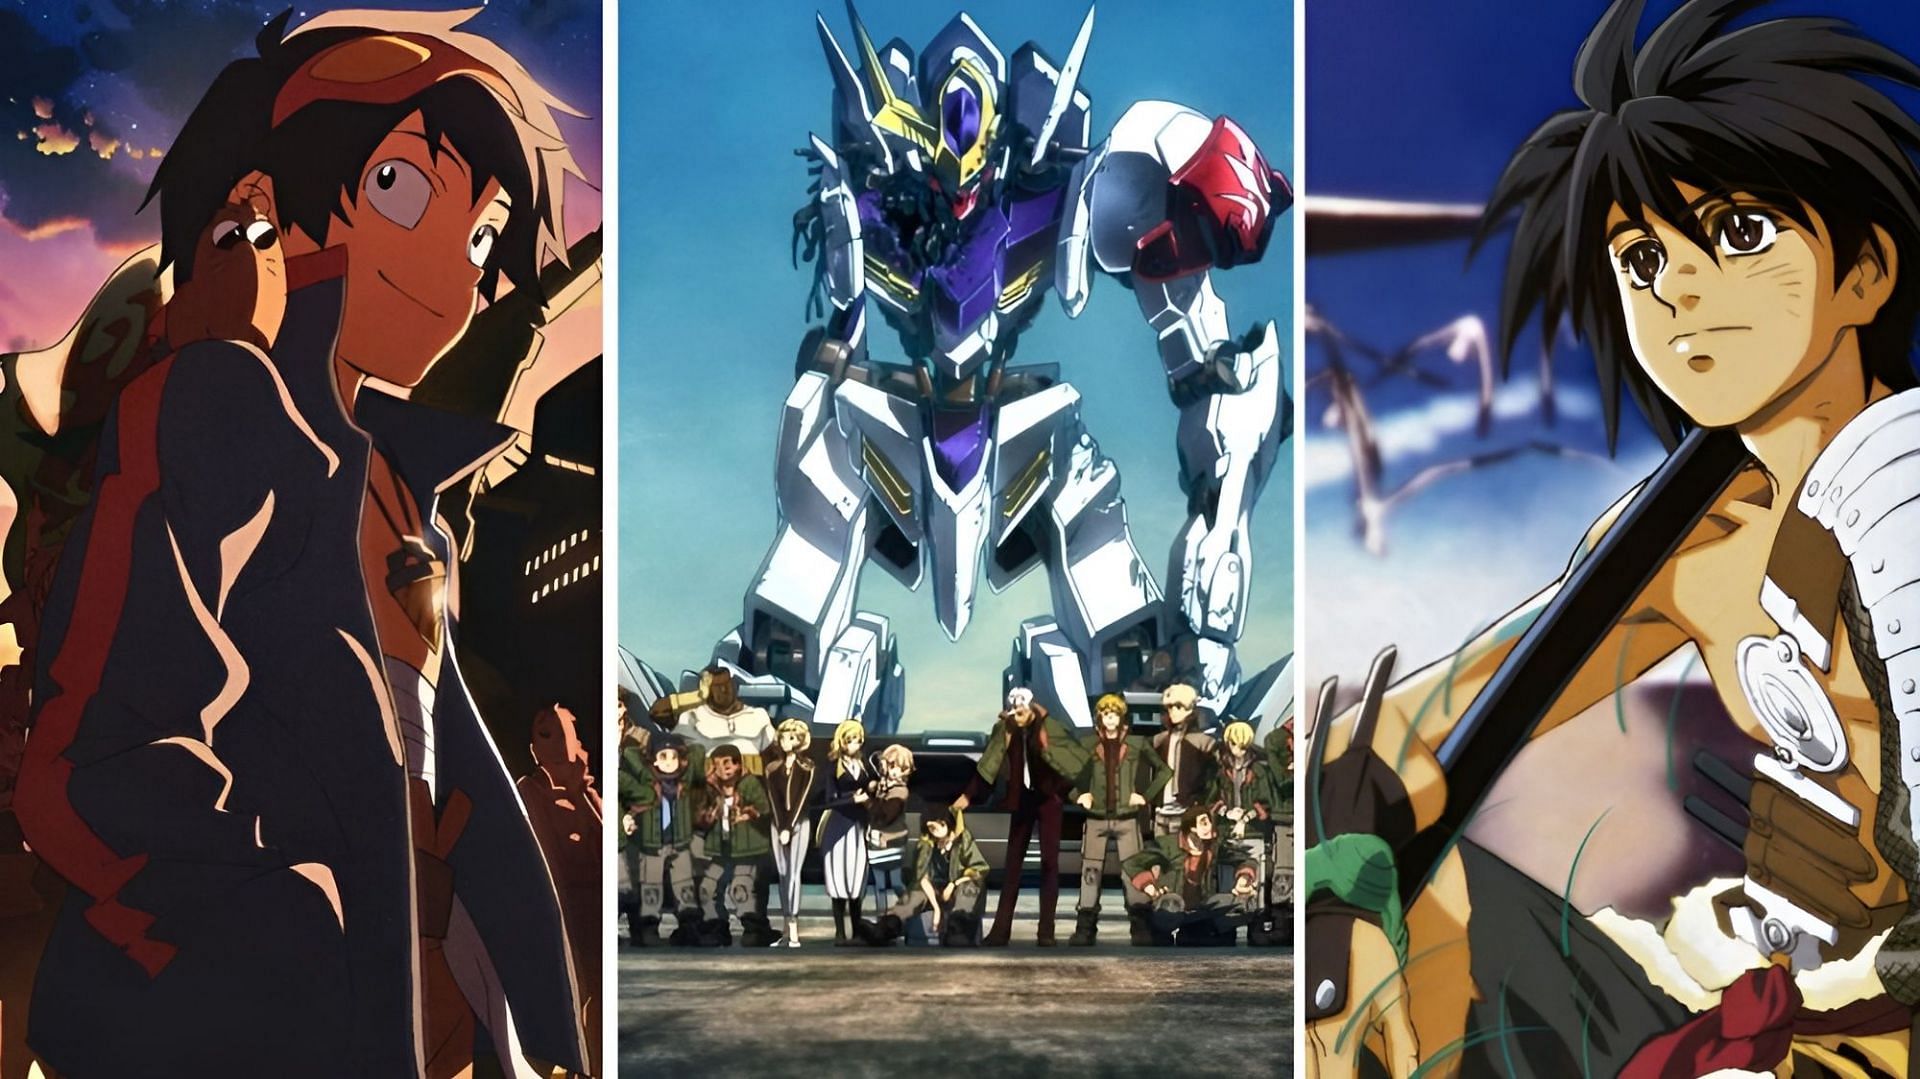 Iron-Blooded Orphans: A Gundam Tragedy | Merlin's Musings